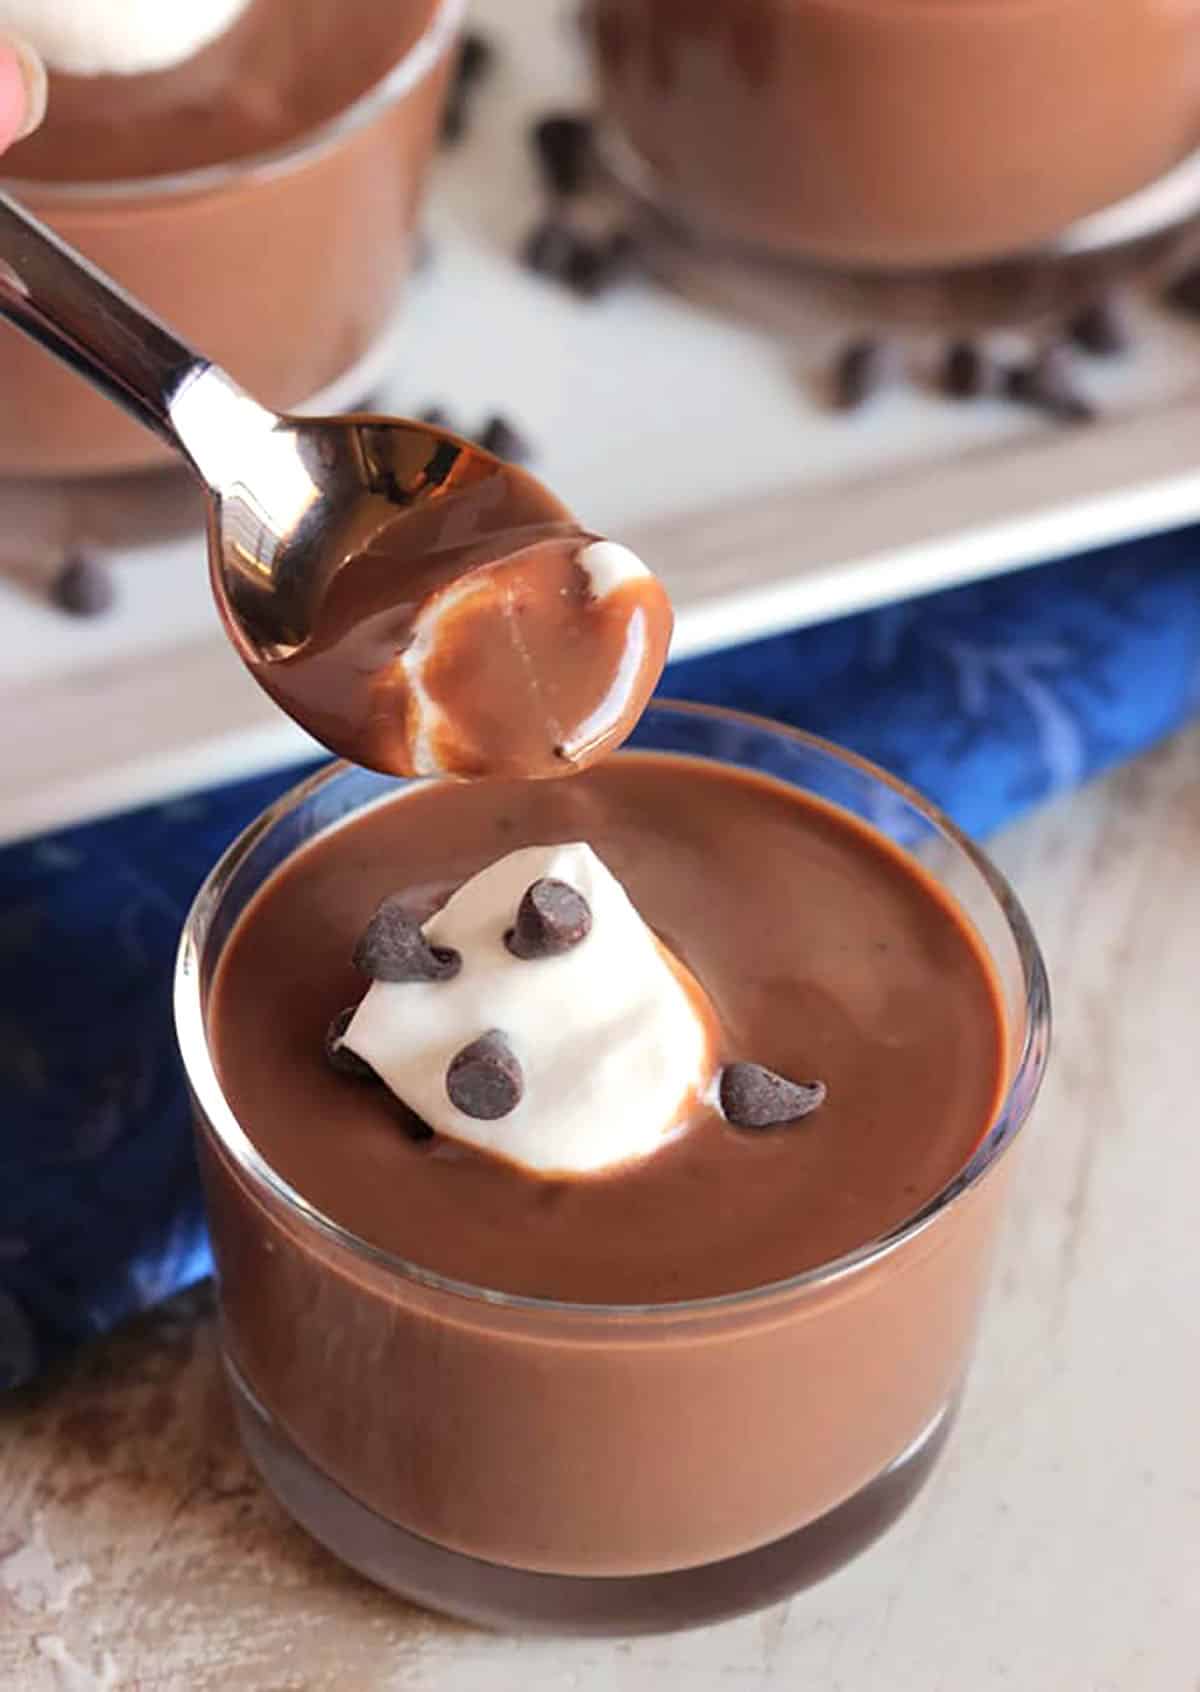 Chocolate pudding in a glass dish with a spoonful of pudding over top of it.